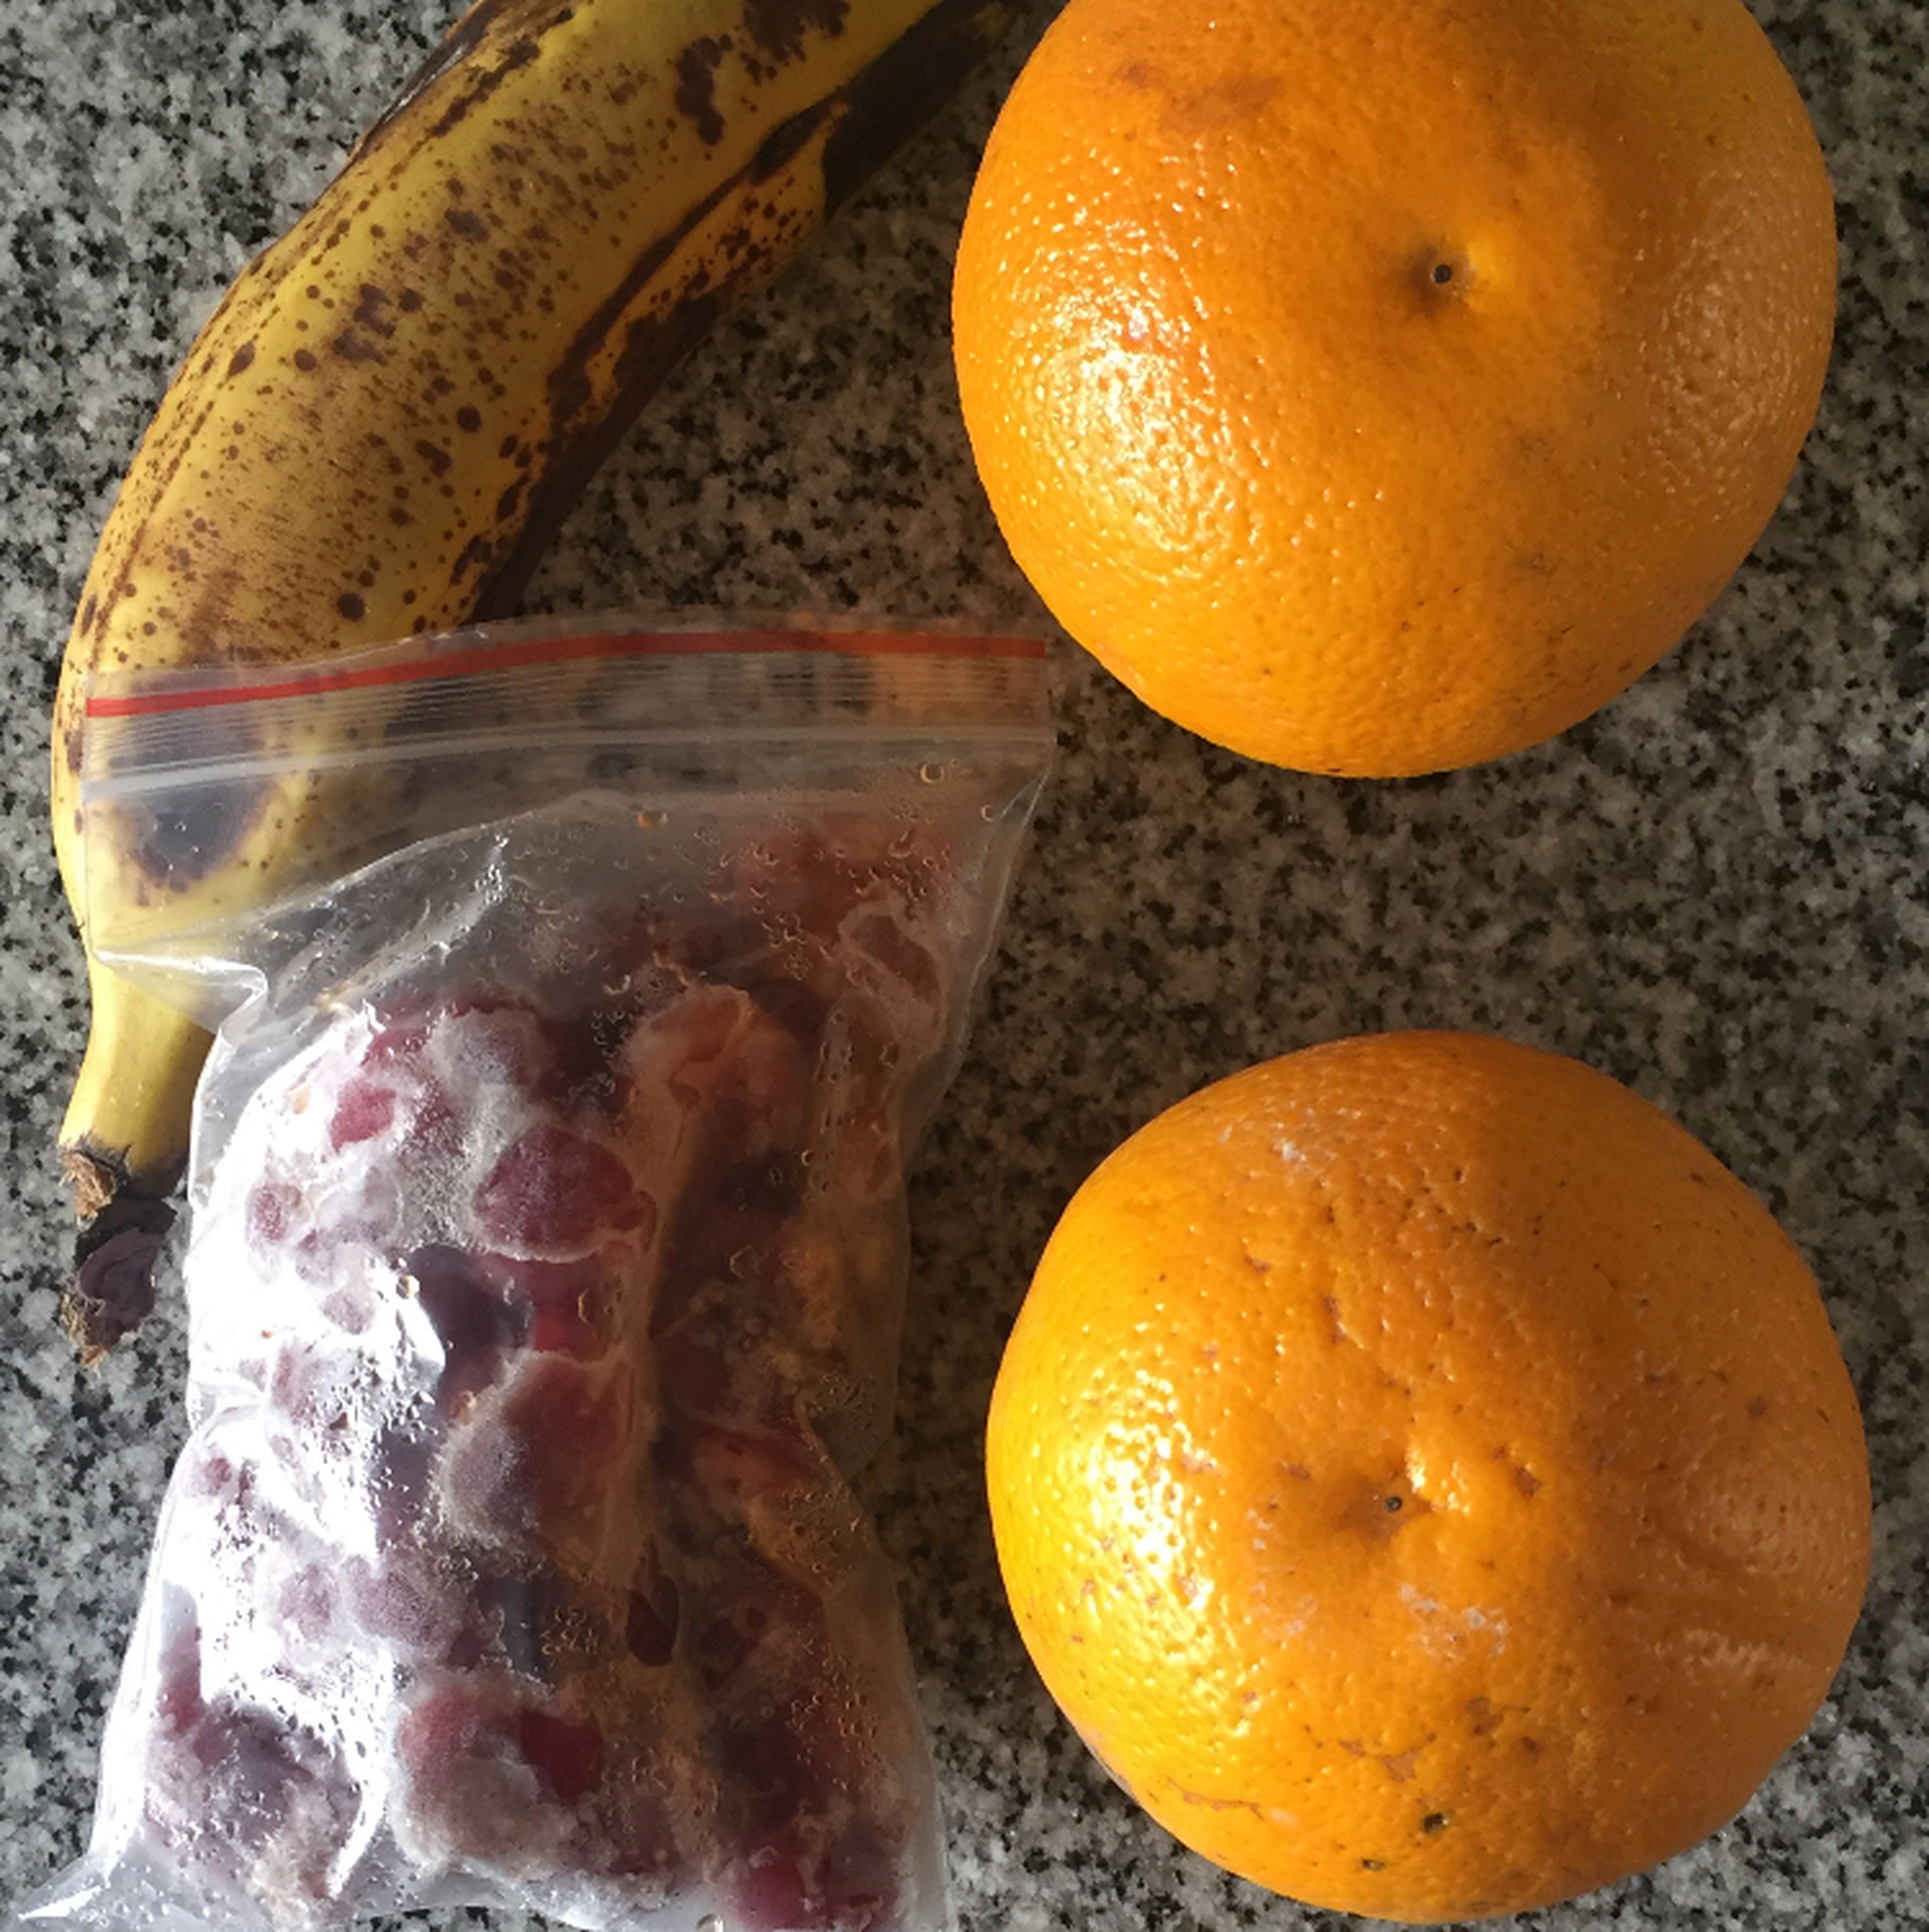 gather all ingredients. Wash and peel banana, core cherries and squeeze orange.